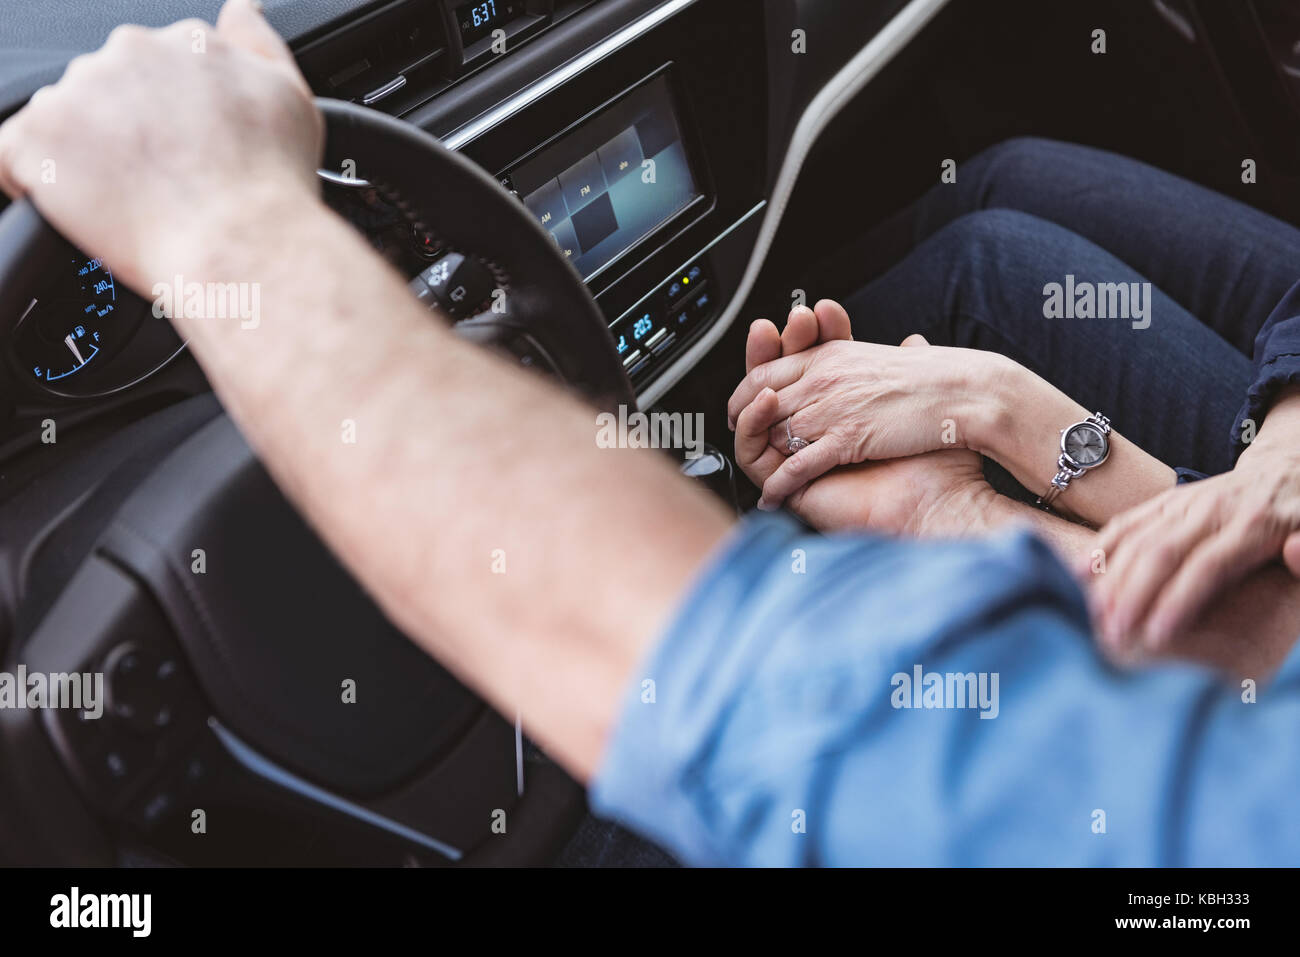 Woman Driving Hands Holding Car High Resolution Stock Photography And Images Alamy